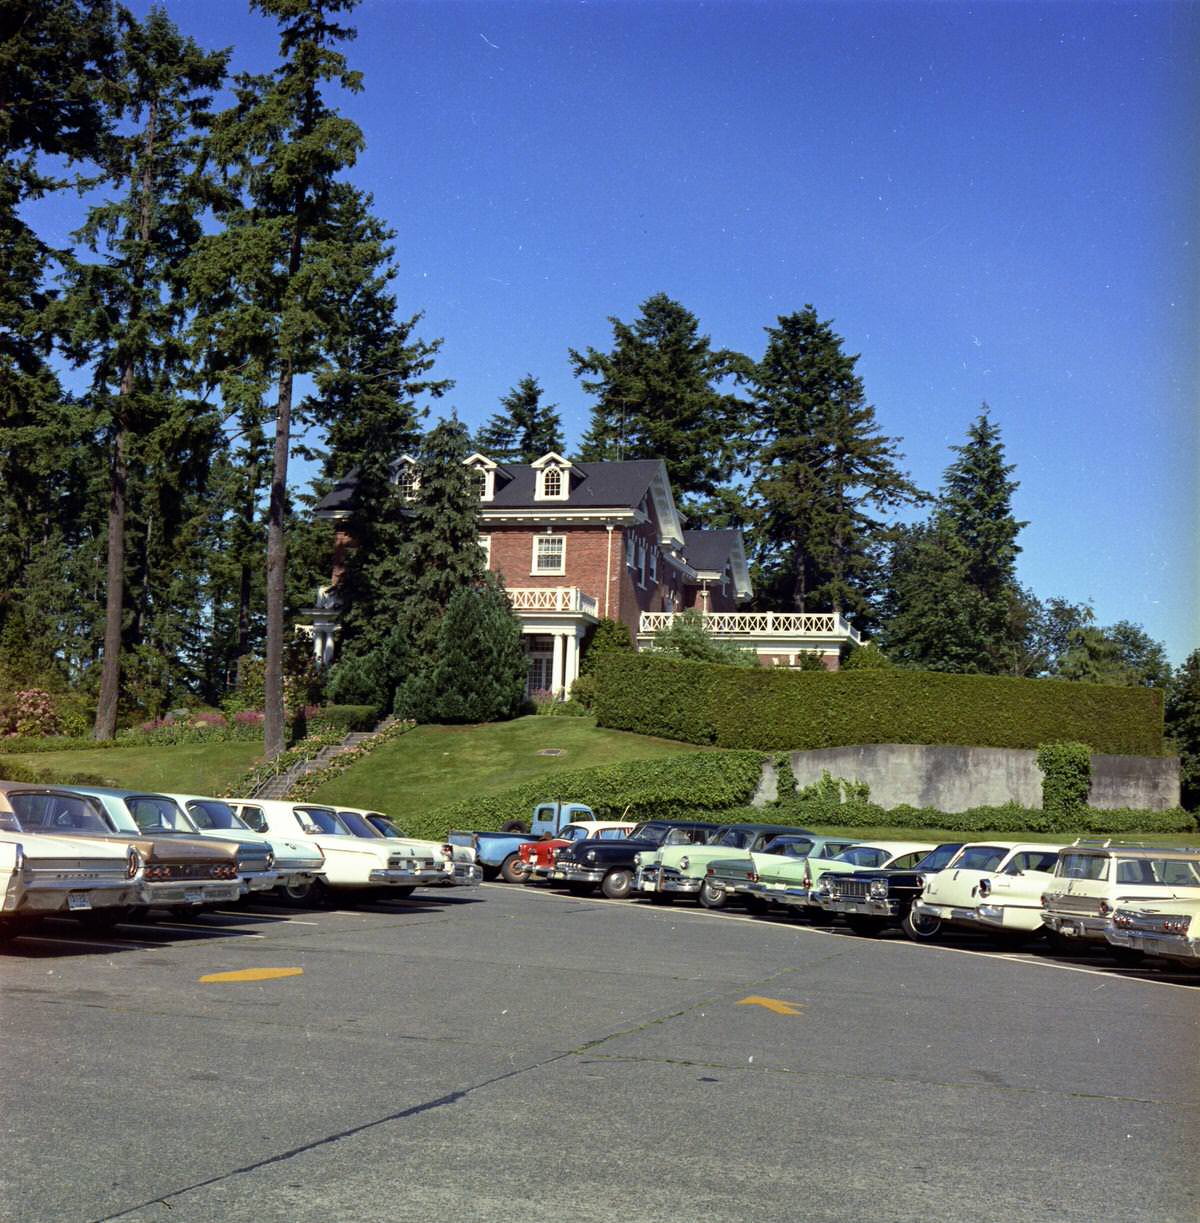 Parking lot and Governor's Mansion, 1964